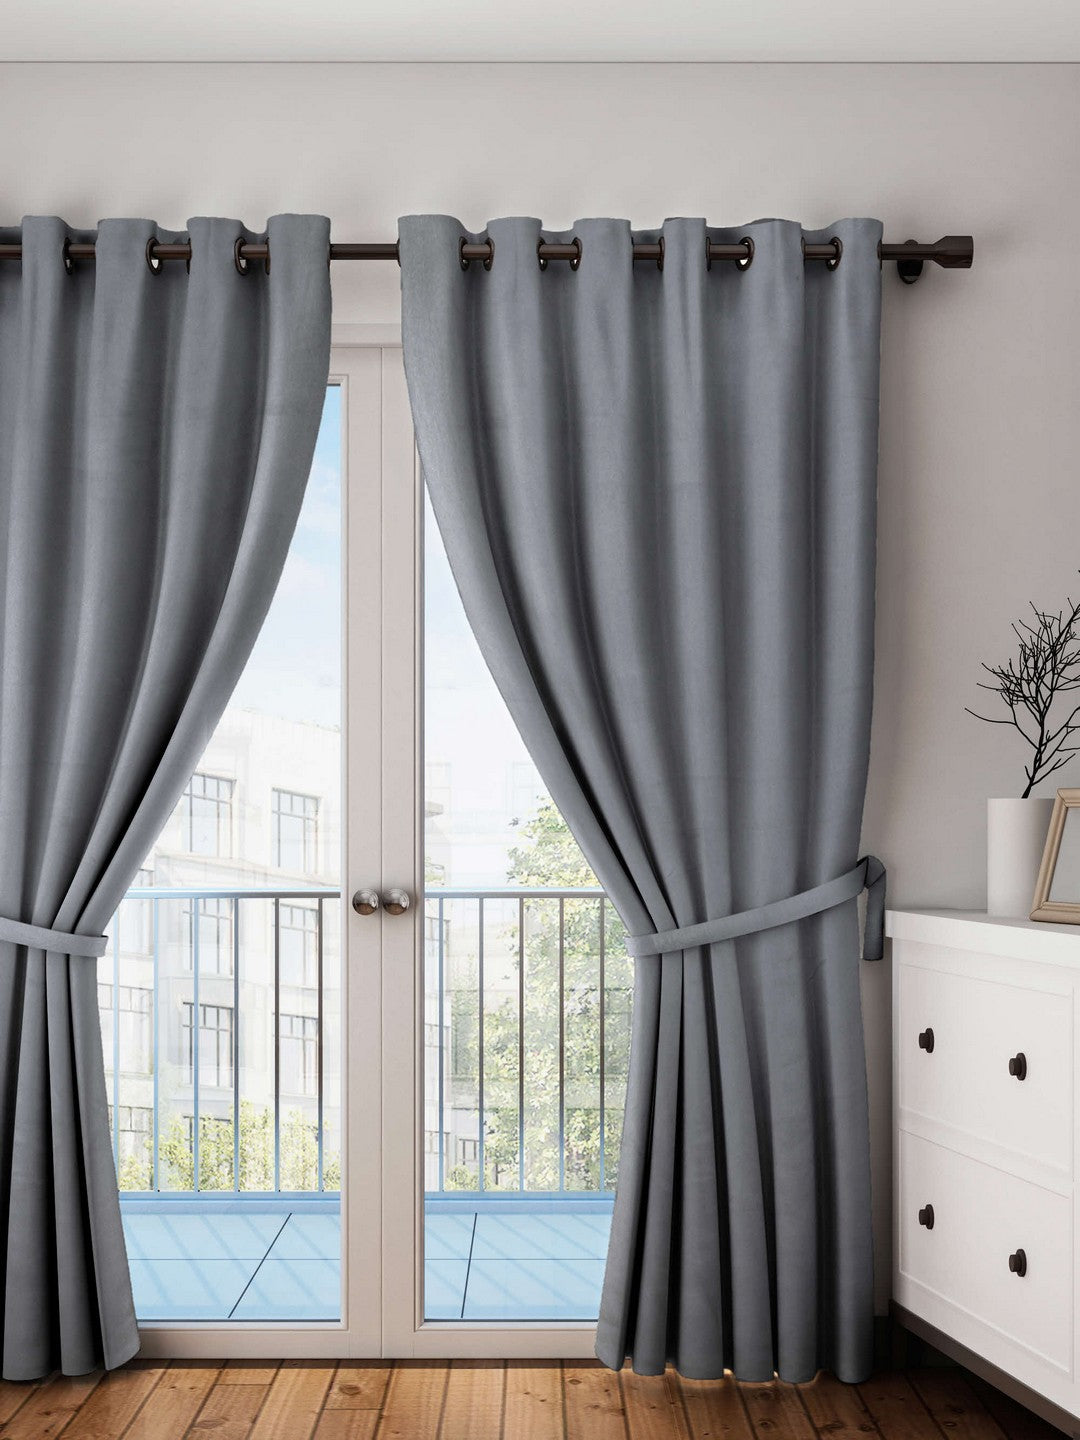 Lushomes curtains 7.5 feet long, Cotton Curtains, Door Curtains, Grey, Curtain with 8 Eyelets, Curtains & Drapes (Size: 54x90 Inches, Set of 1)